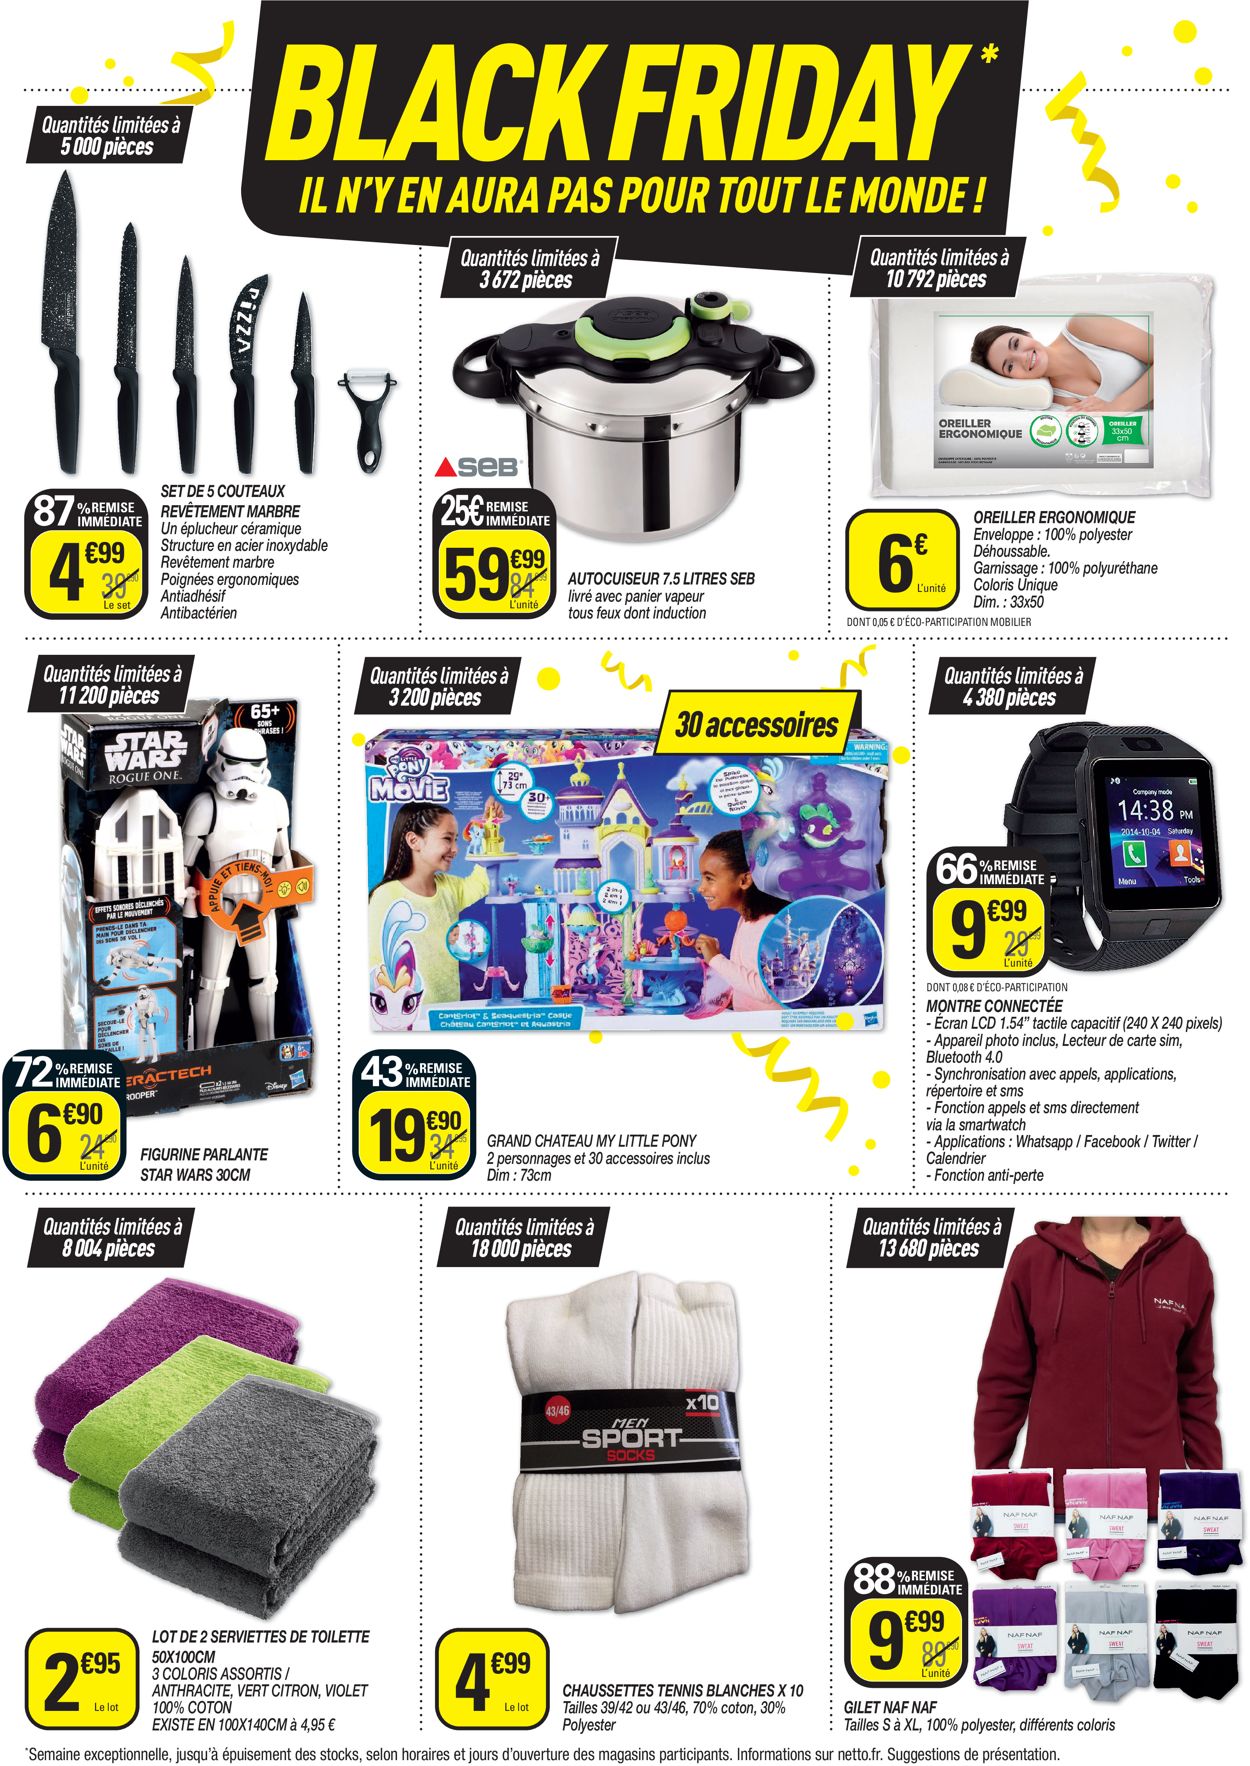 Netto - BLACK FRIDAY 2019 Catalogue - 26.11-01.12.2019 (Page 2)